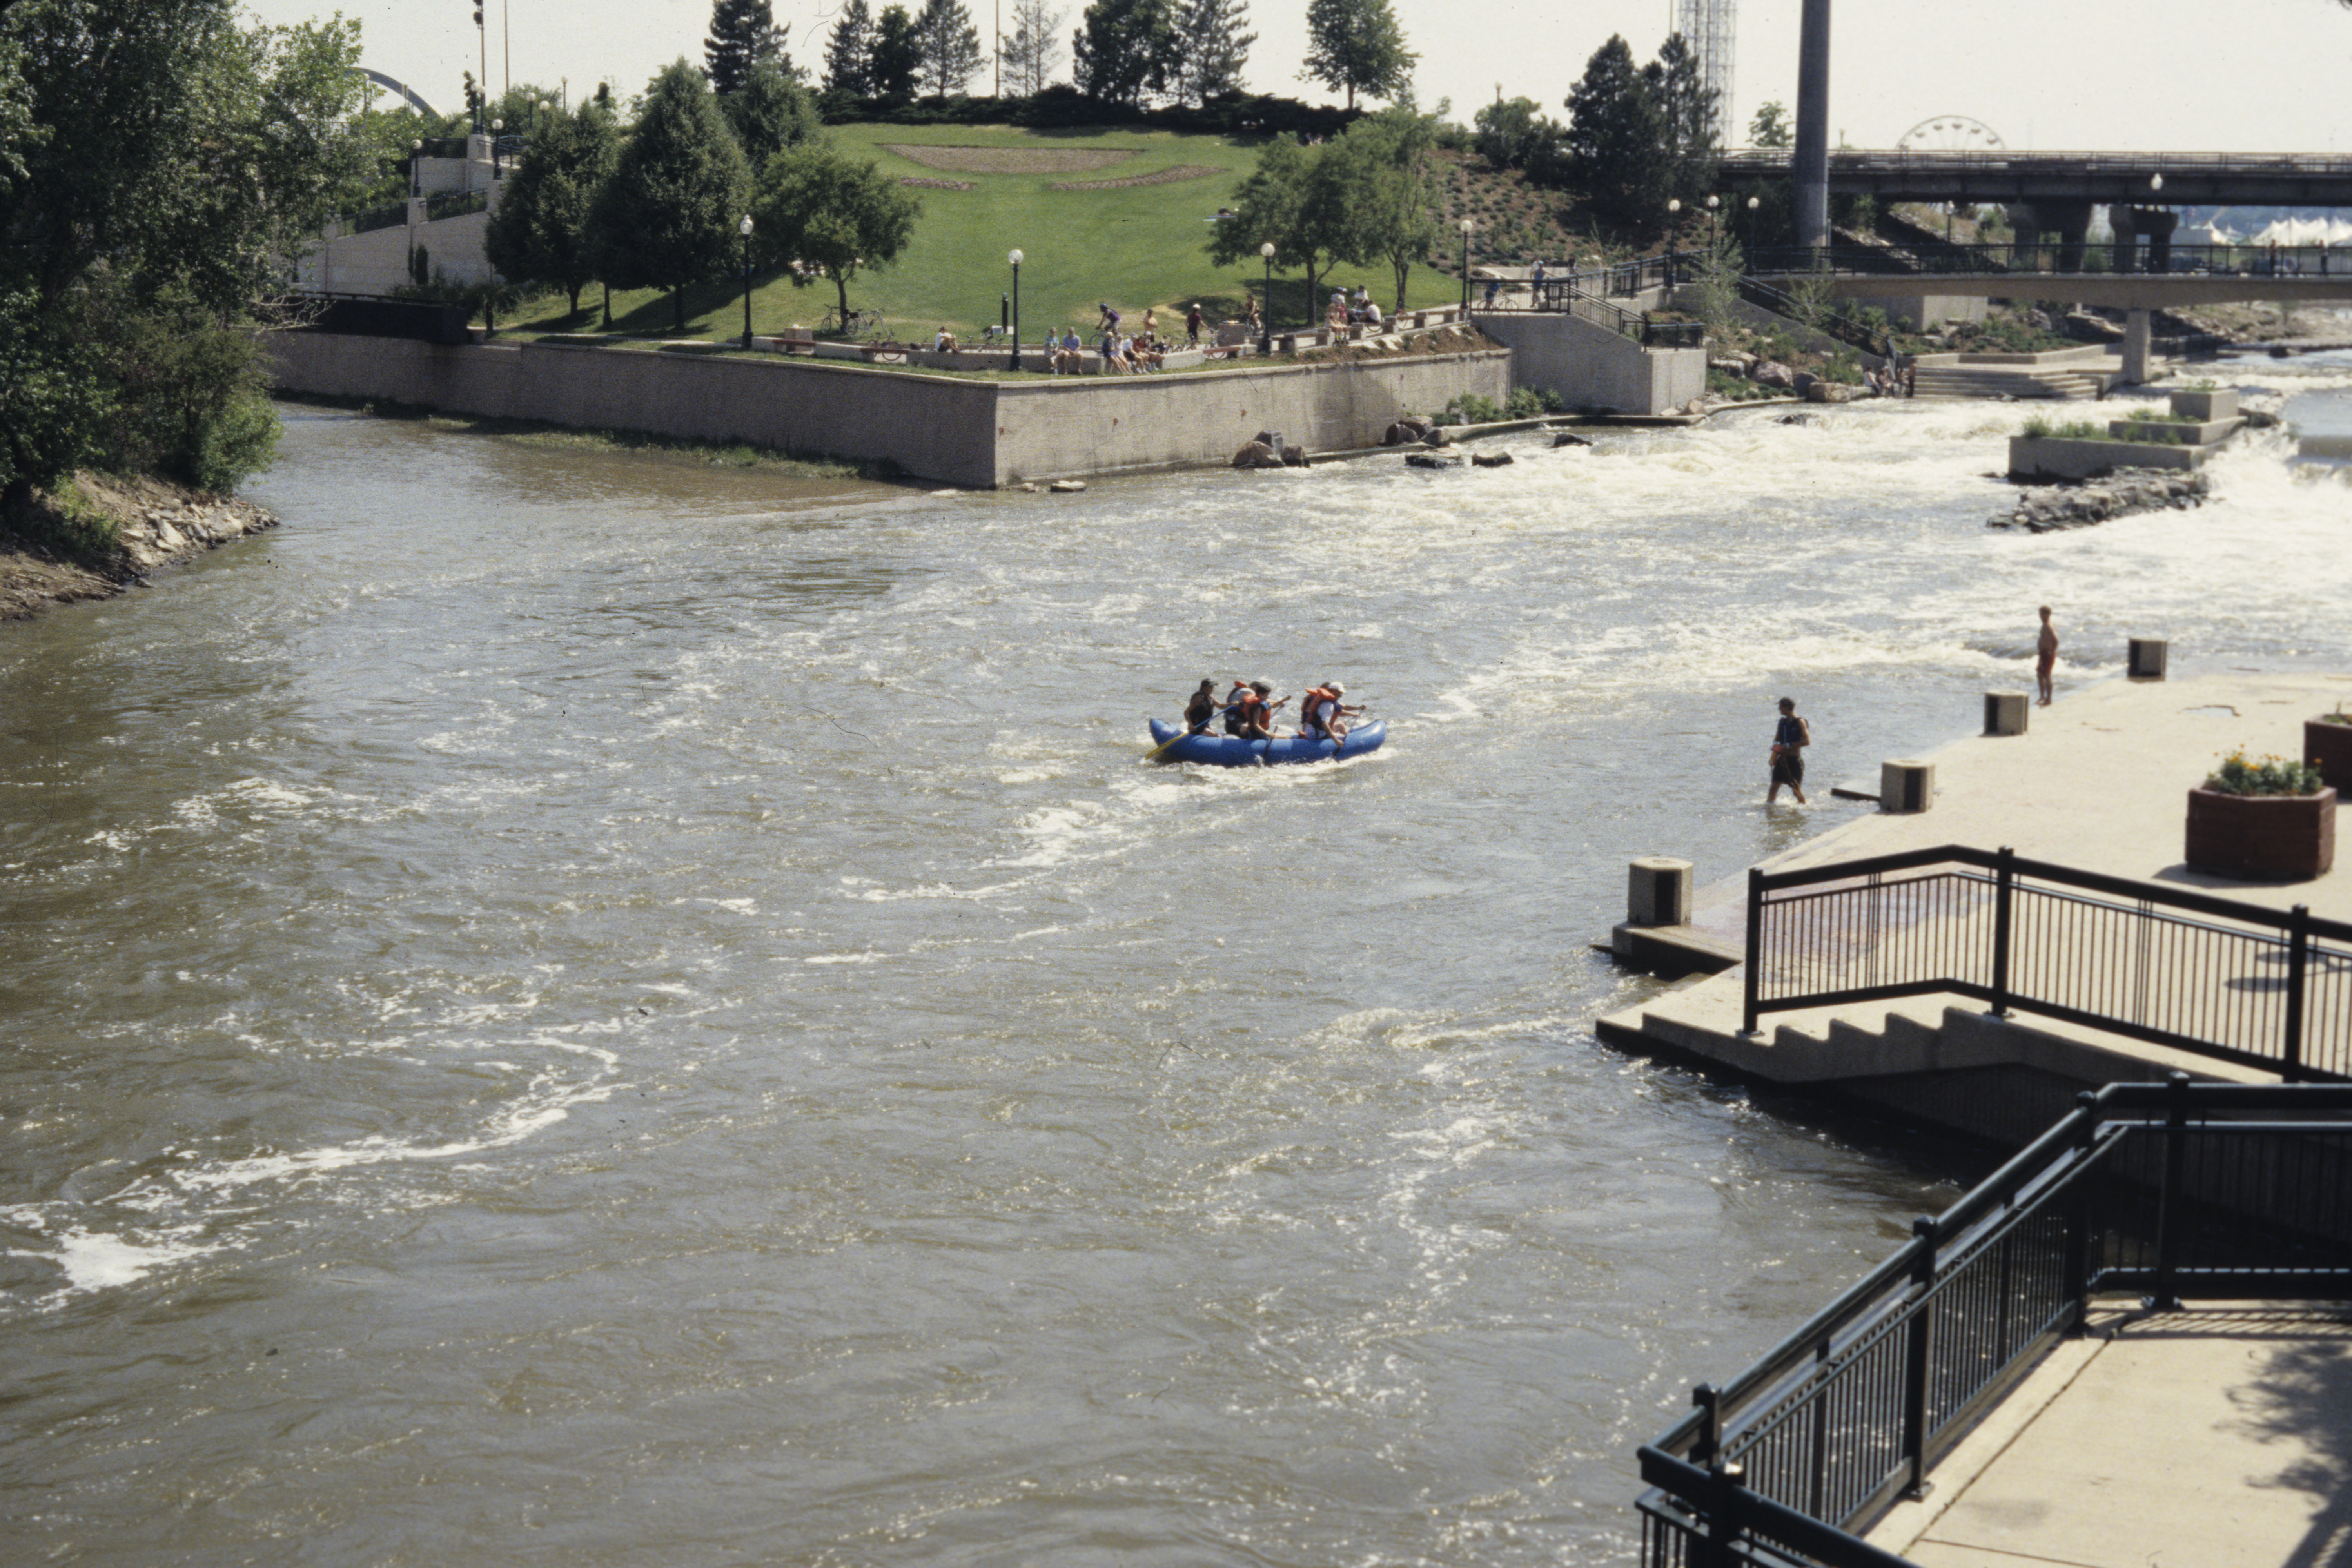 Photo of the point where two waterways meet at Confluence Park in Lower Downtown Denver. There are people floating on a blue raft in the water, while onlookers from the banks watch. 